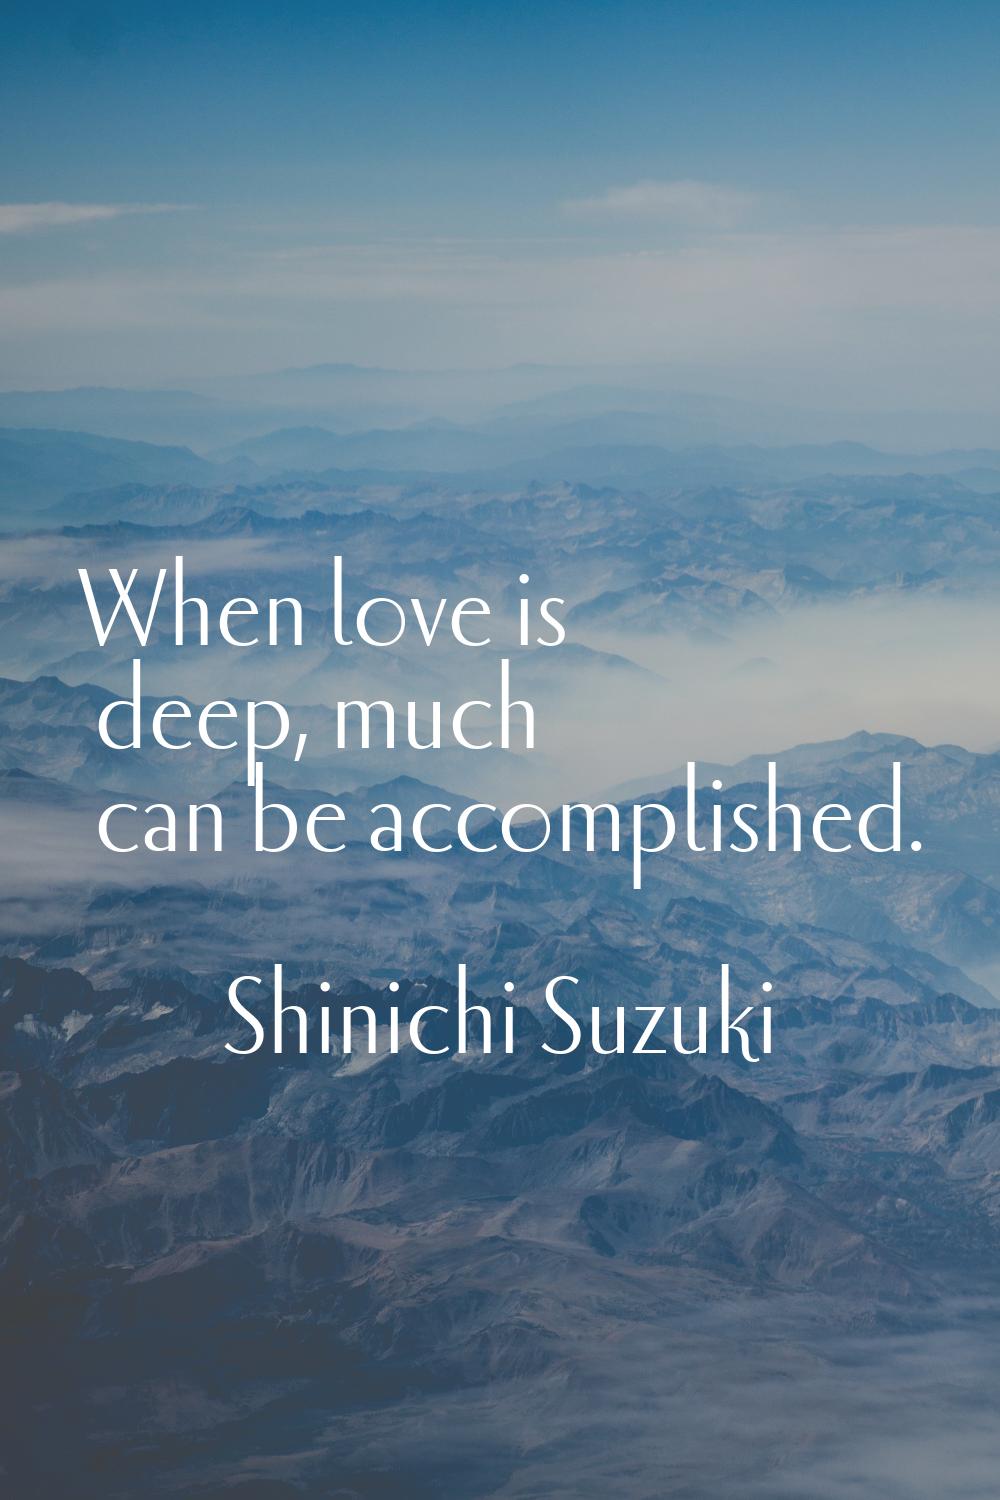 When love is deep, much can be accomplished.